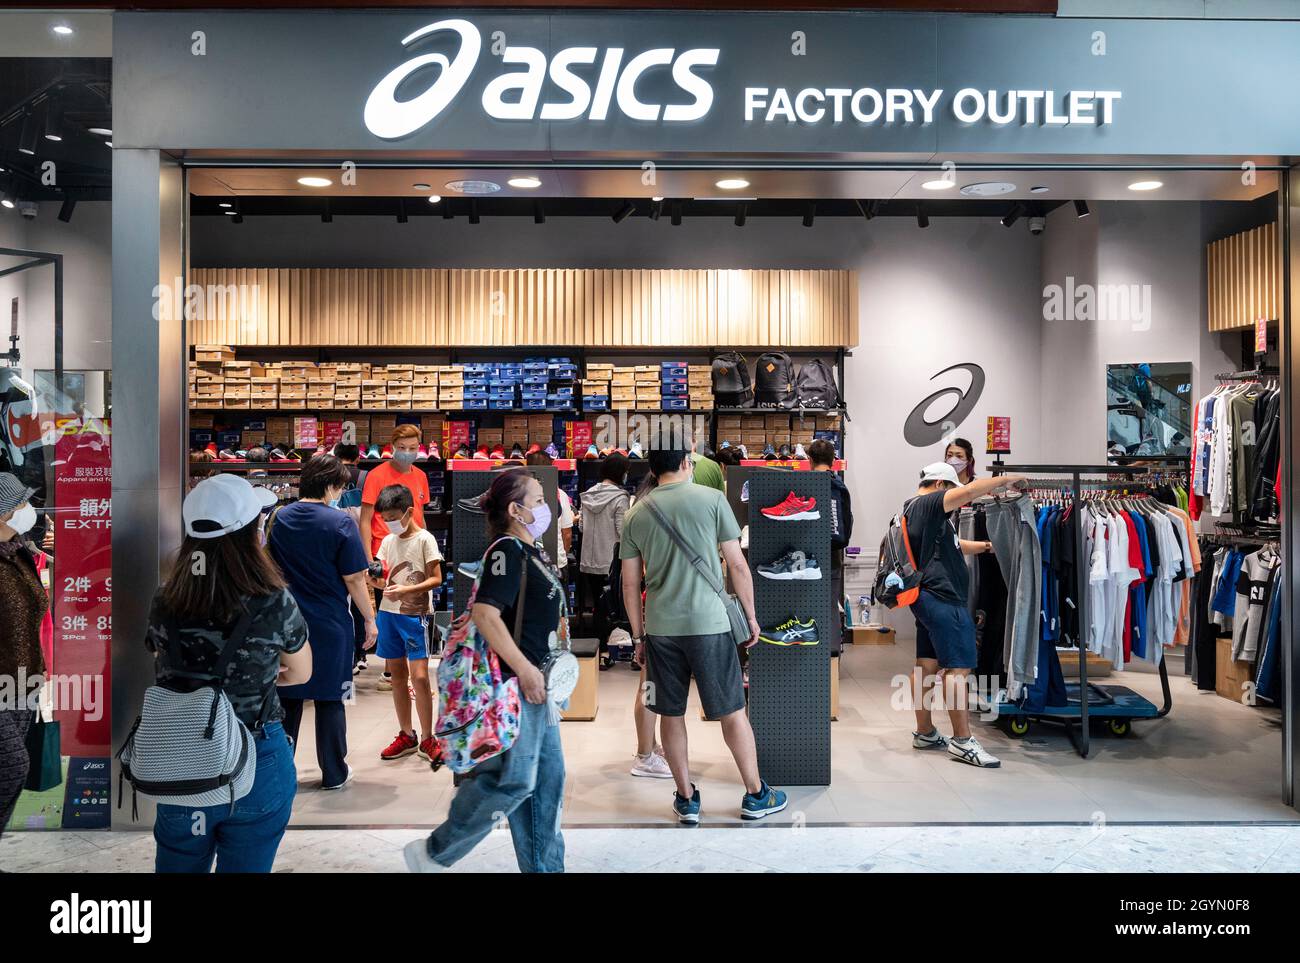 Asics Sports High Resolution Stock Photography and Images - Alamy